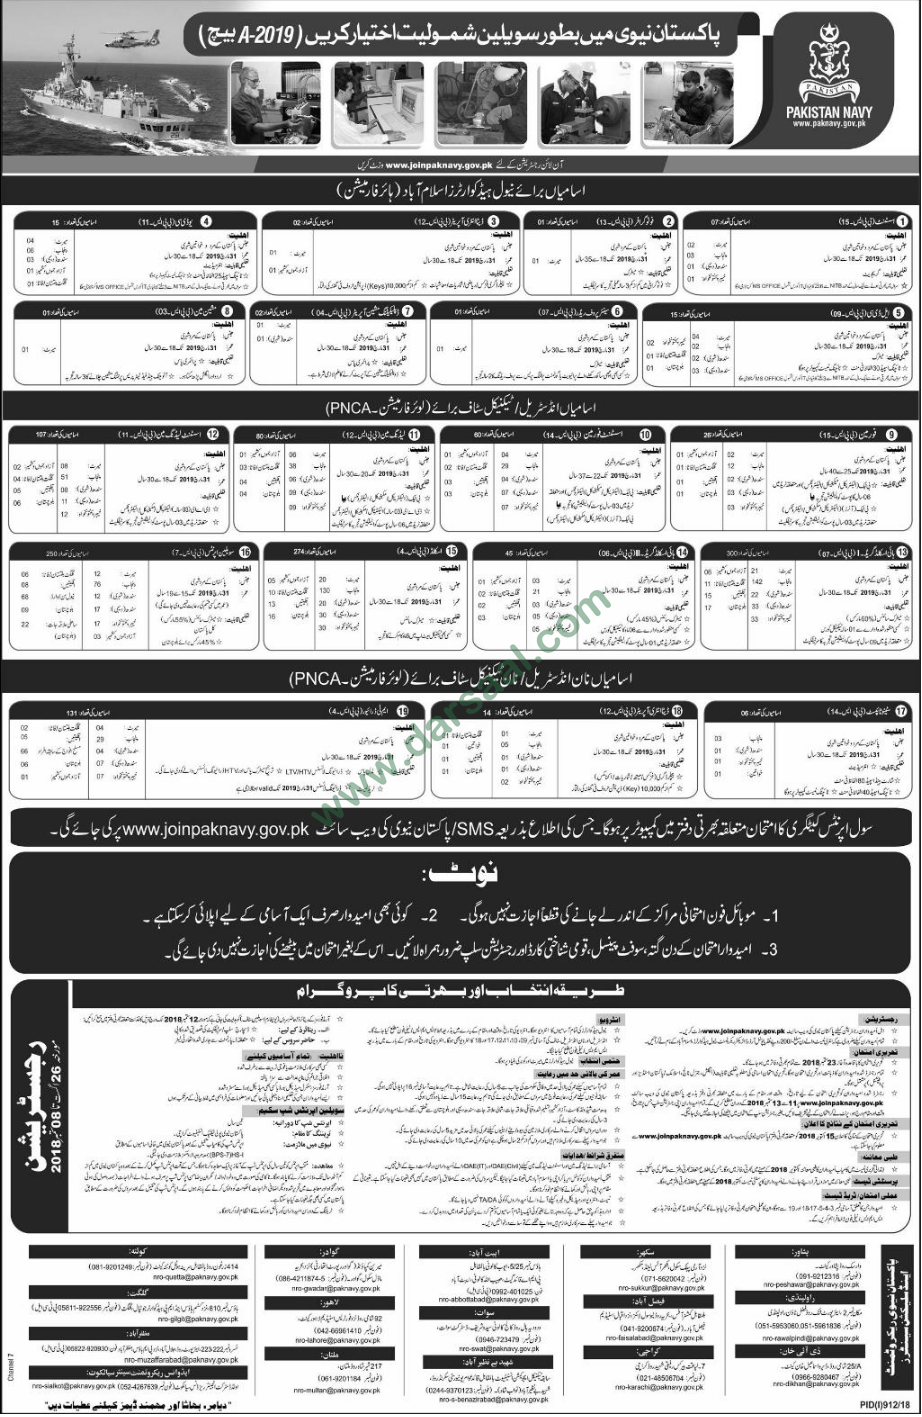 Data Entry Operator, Photographer, Assistant Jobs in Pakistan Navy, 26 August 2018